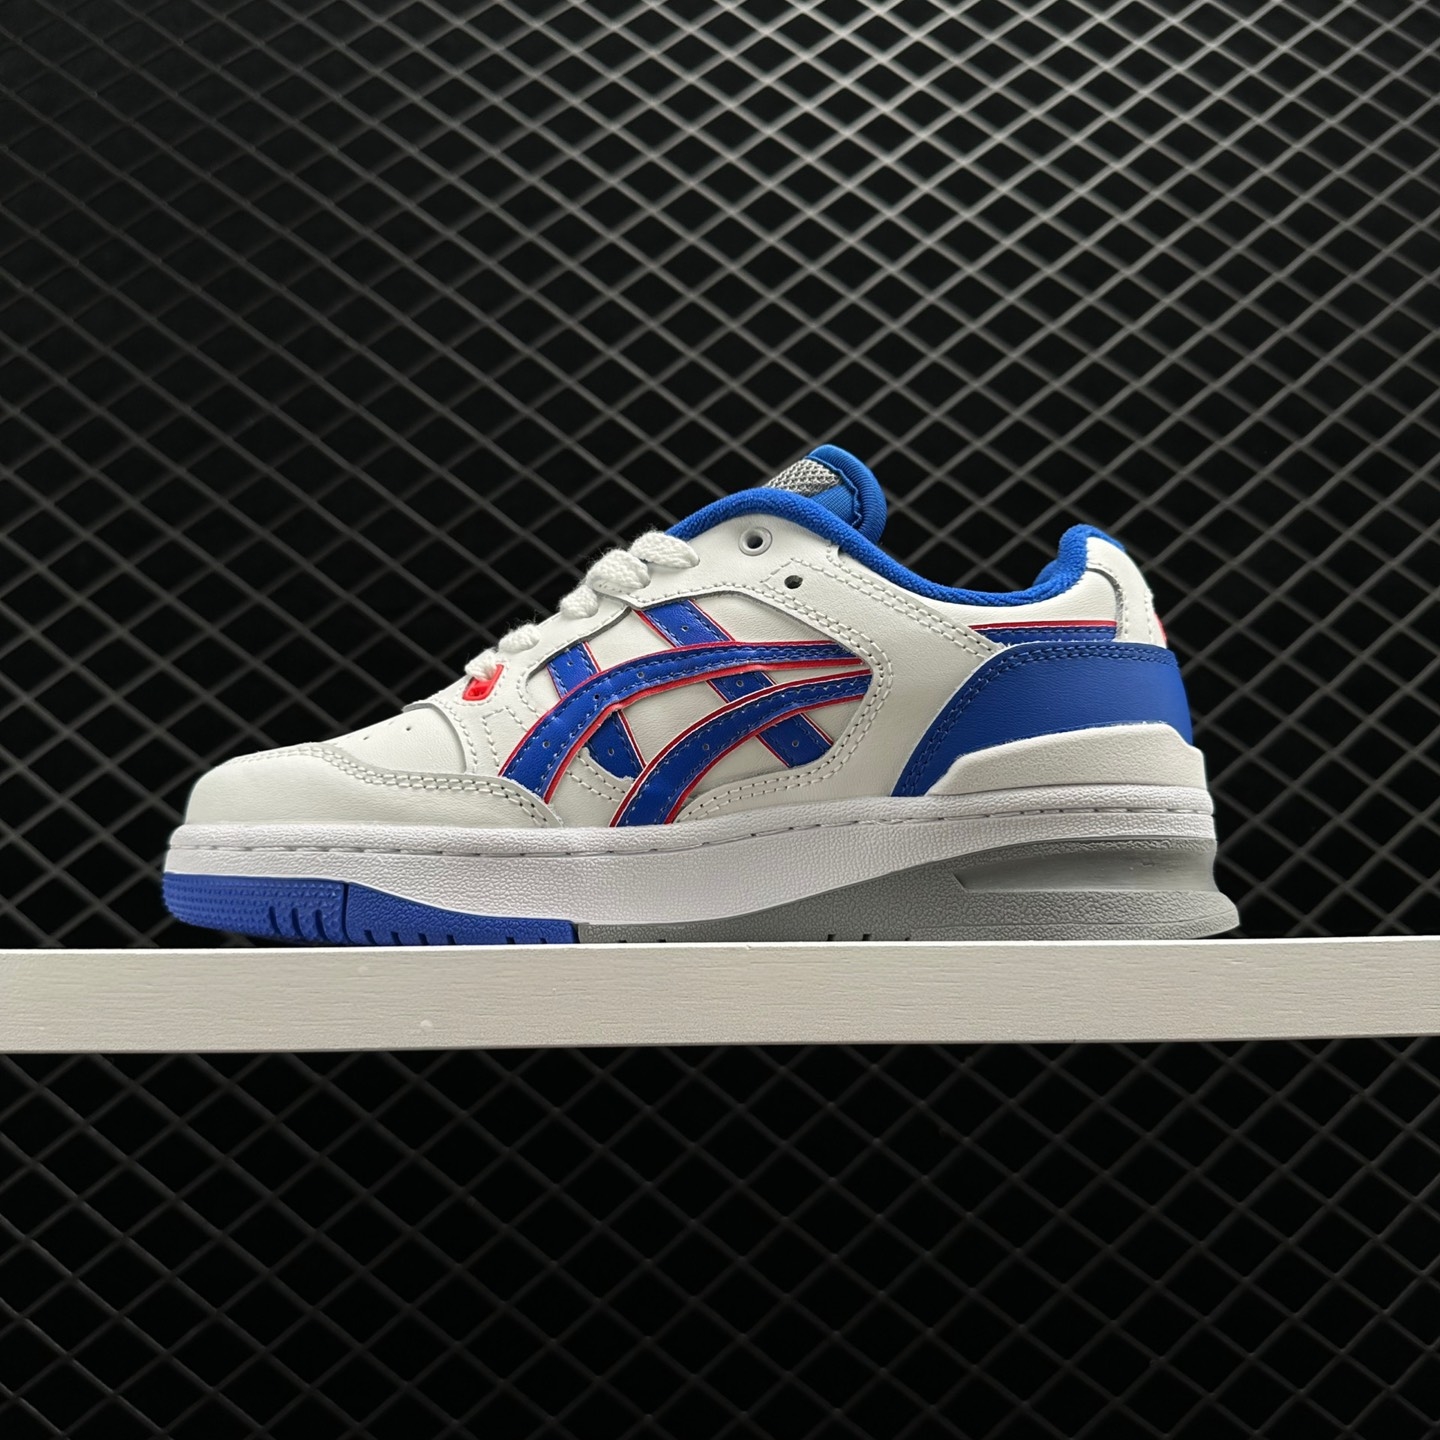 Asics EX89 'Knicks' 1201A476-101 - Stylish and Functional Footwear | Buy Now